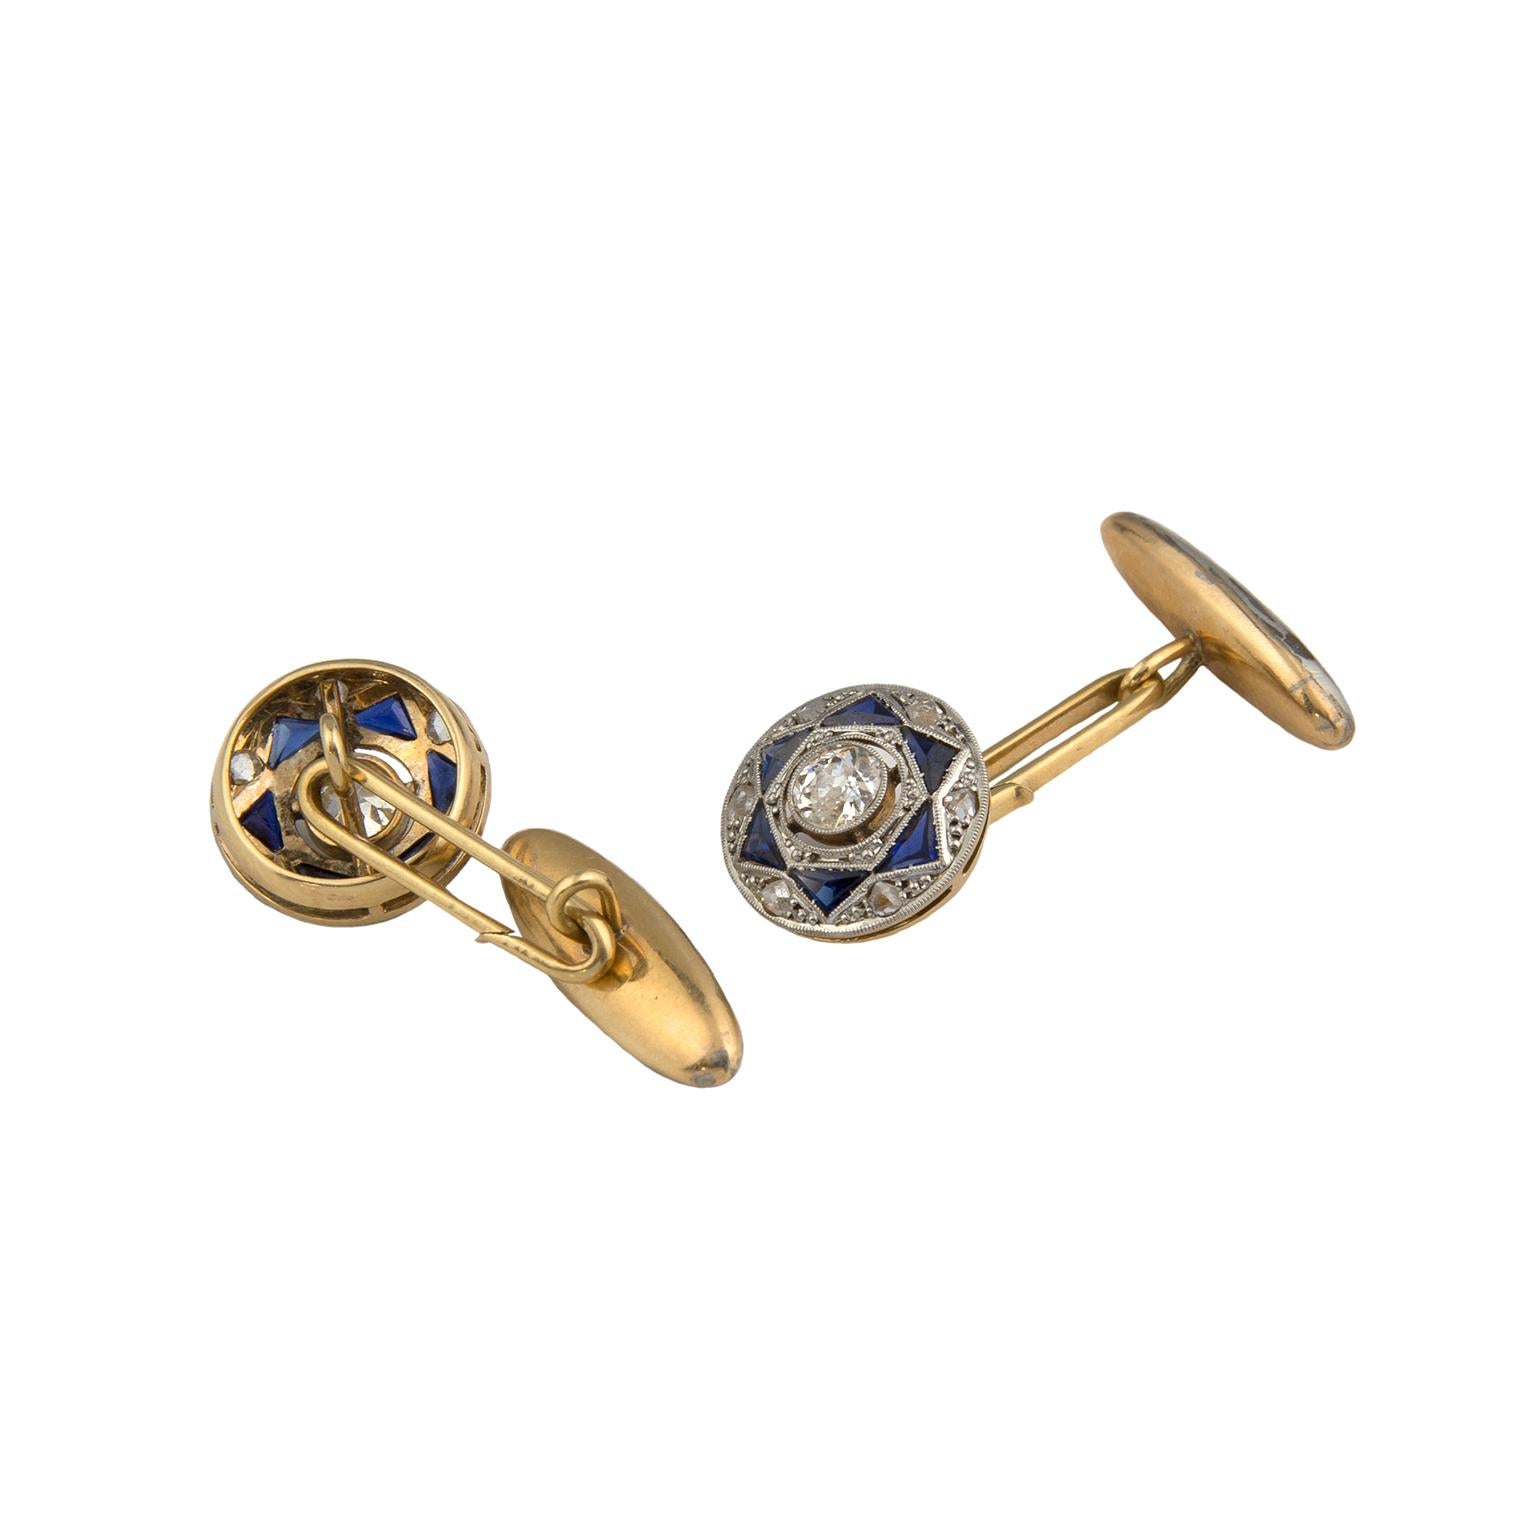 Cufflinks from the first half of the 20th century, in platinum-topped 18 Karat gold, set with two 0.25 carats old european cut diamonds, surrounded by 12 triangular cut blue stones and 12 rose cut diamonds, totalling 0.10 carats in weight.